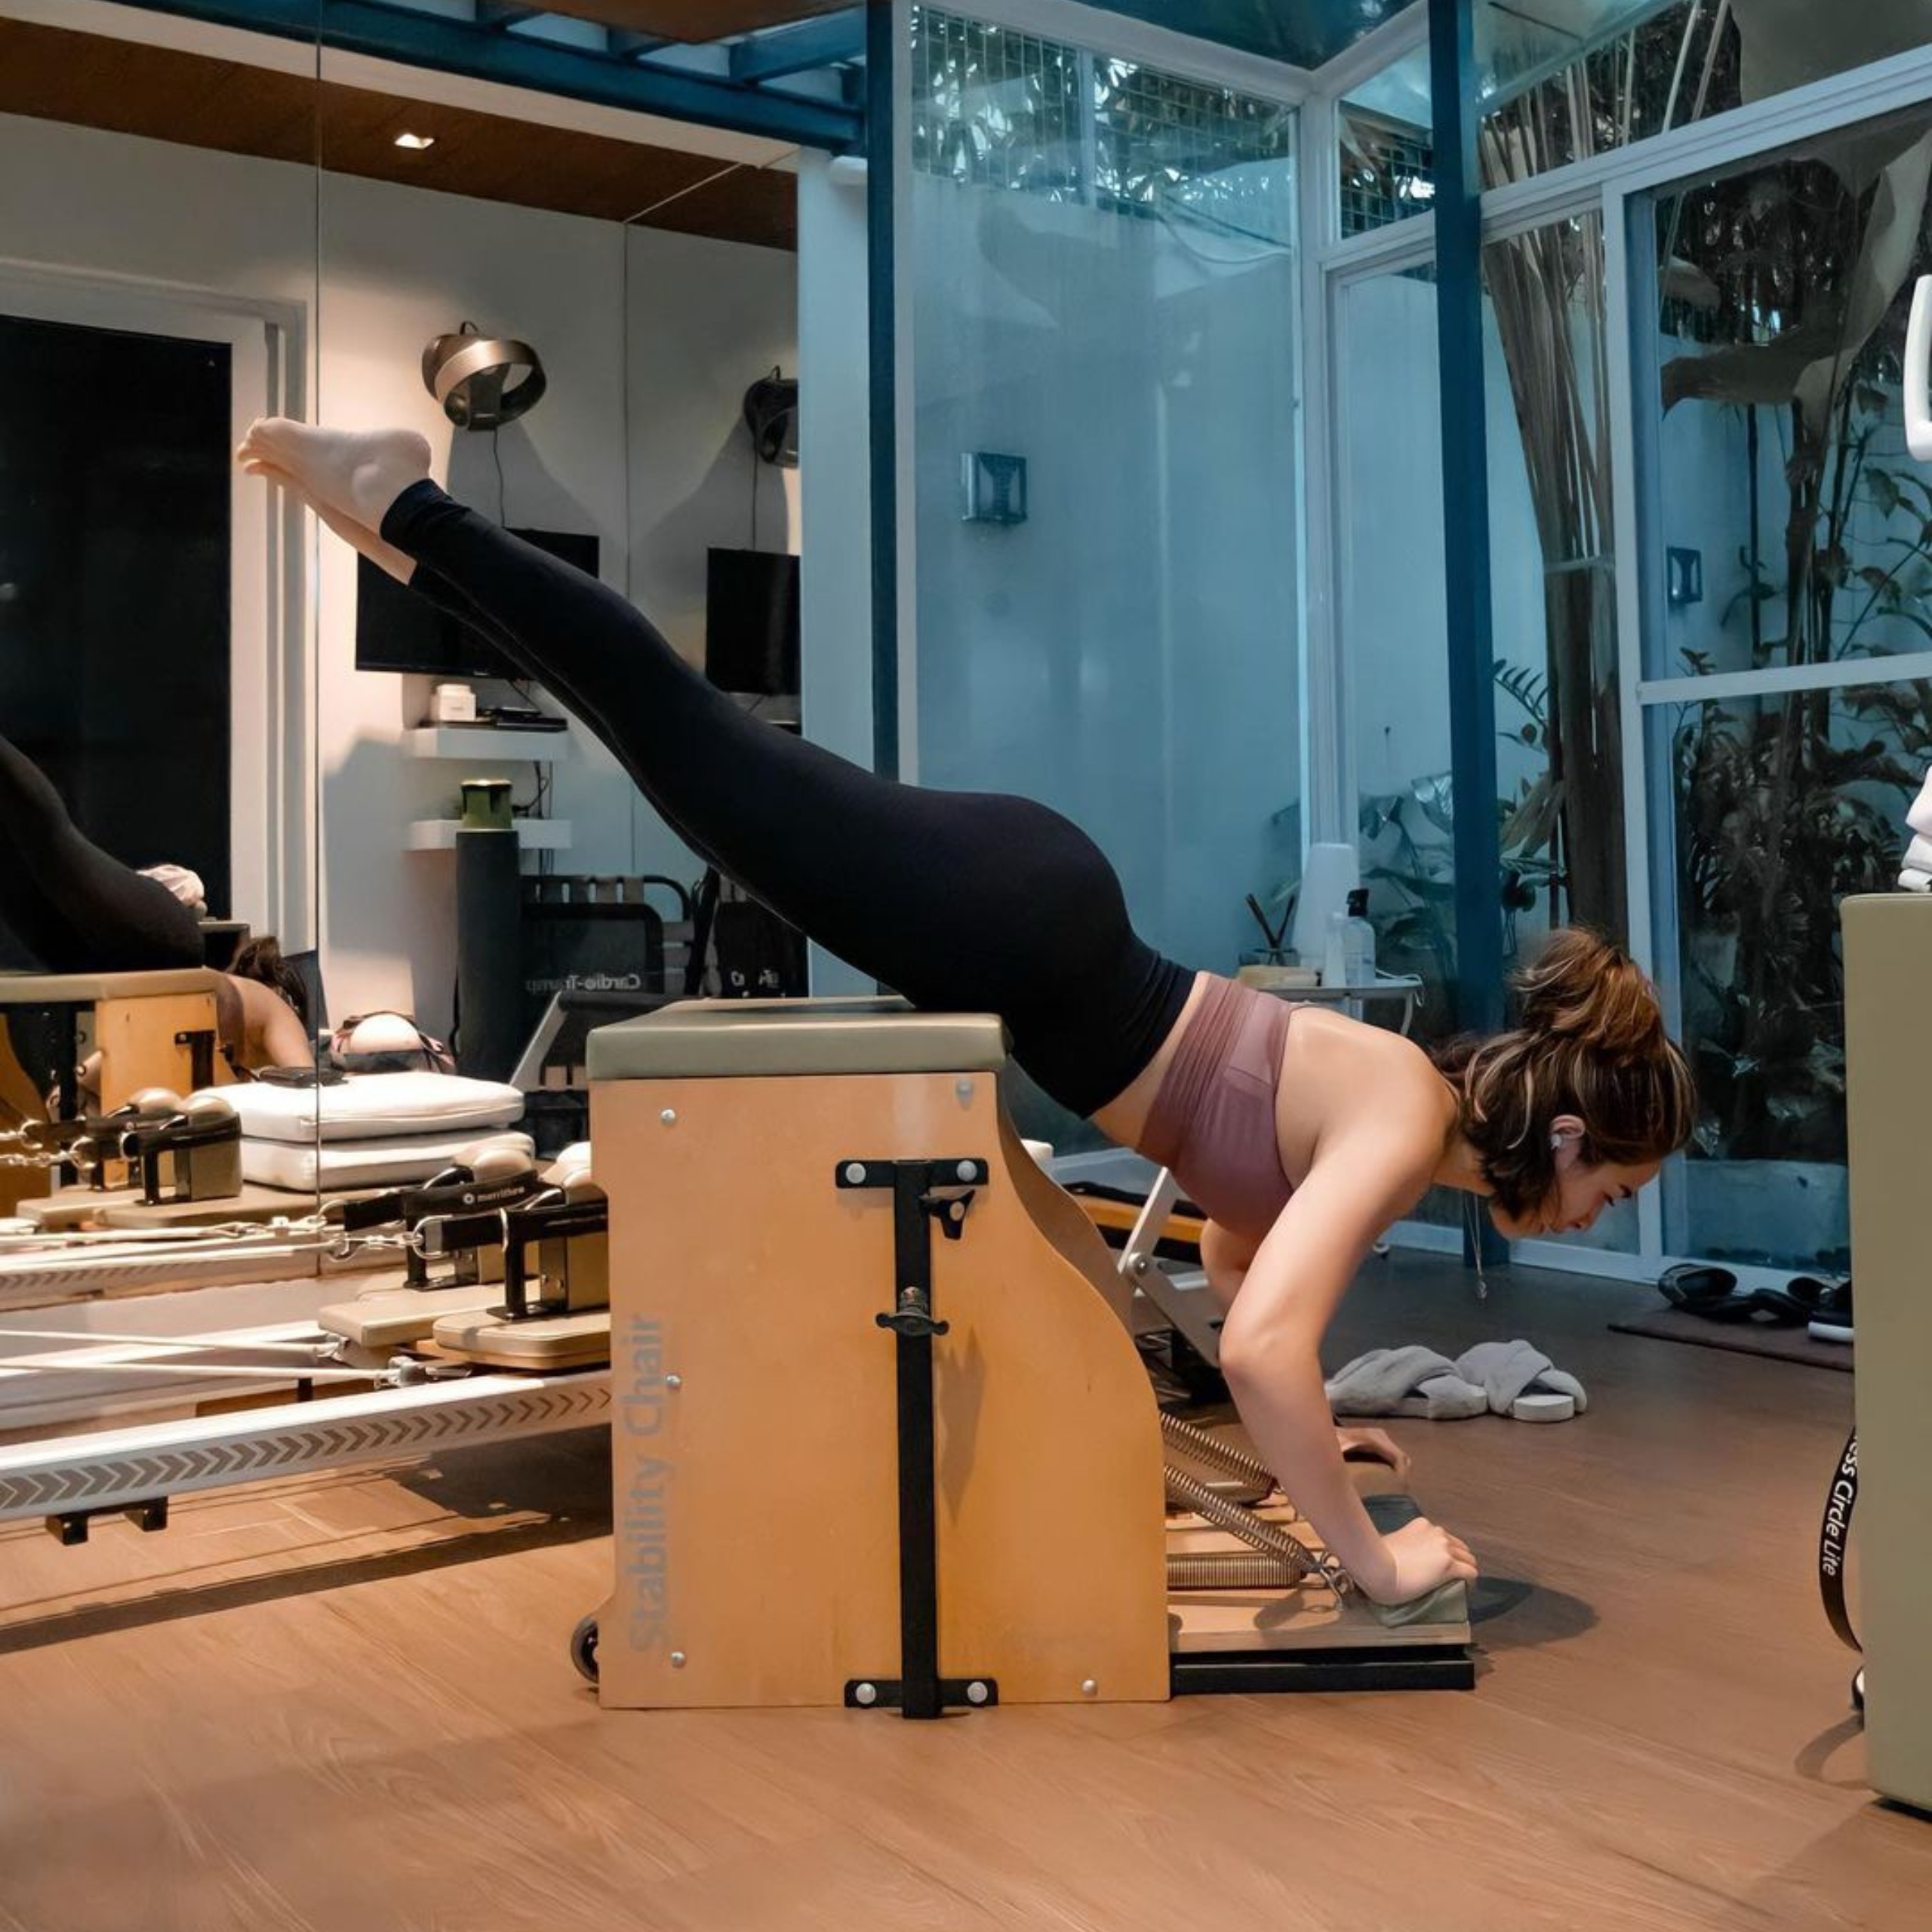 Follow the Lead of These 5 Celebrities That Love Pilates